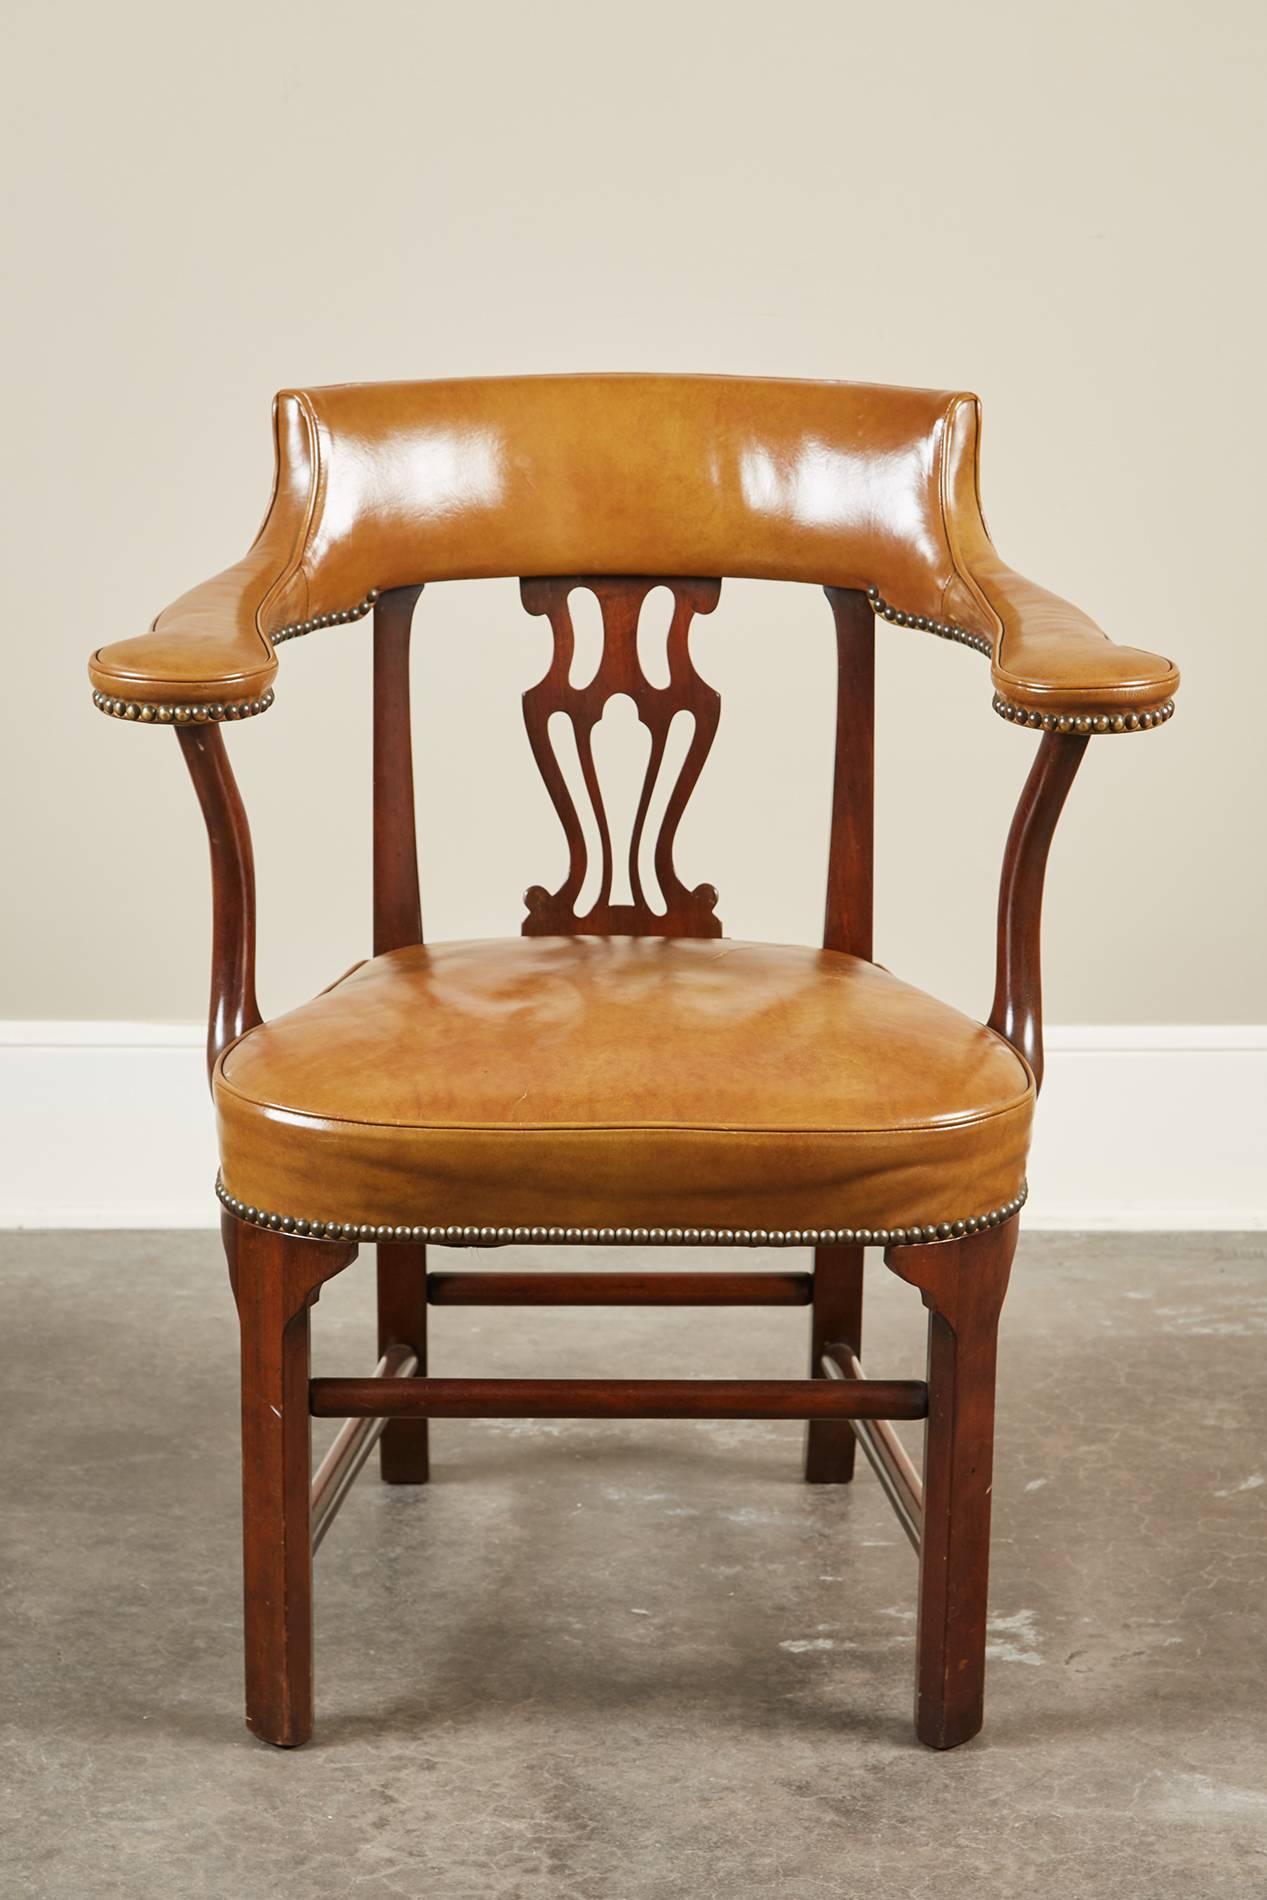 A unique pair of Mid-Century Modern American mahogany and leather armchairs with an abstract urn-like shaped splat. The crest rail is upholstered with the leather that continues onto the armrests and is held together by nailheads.  